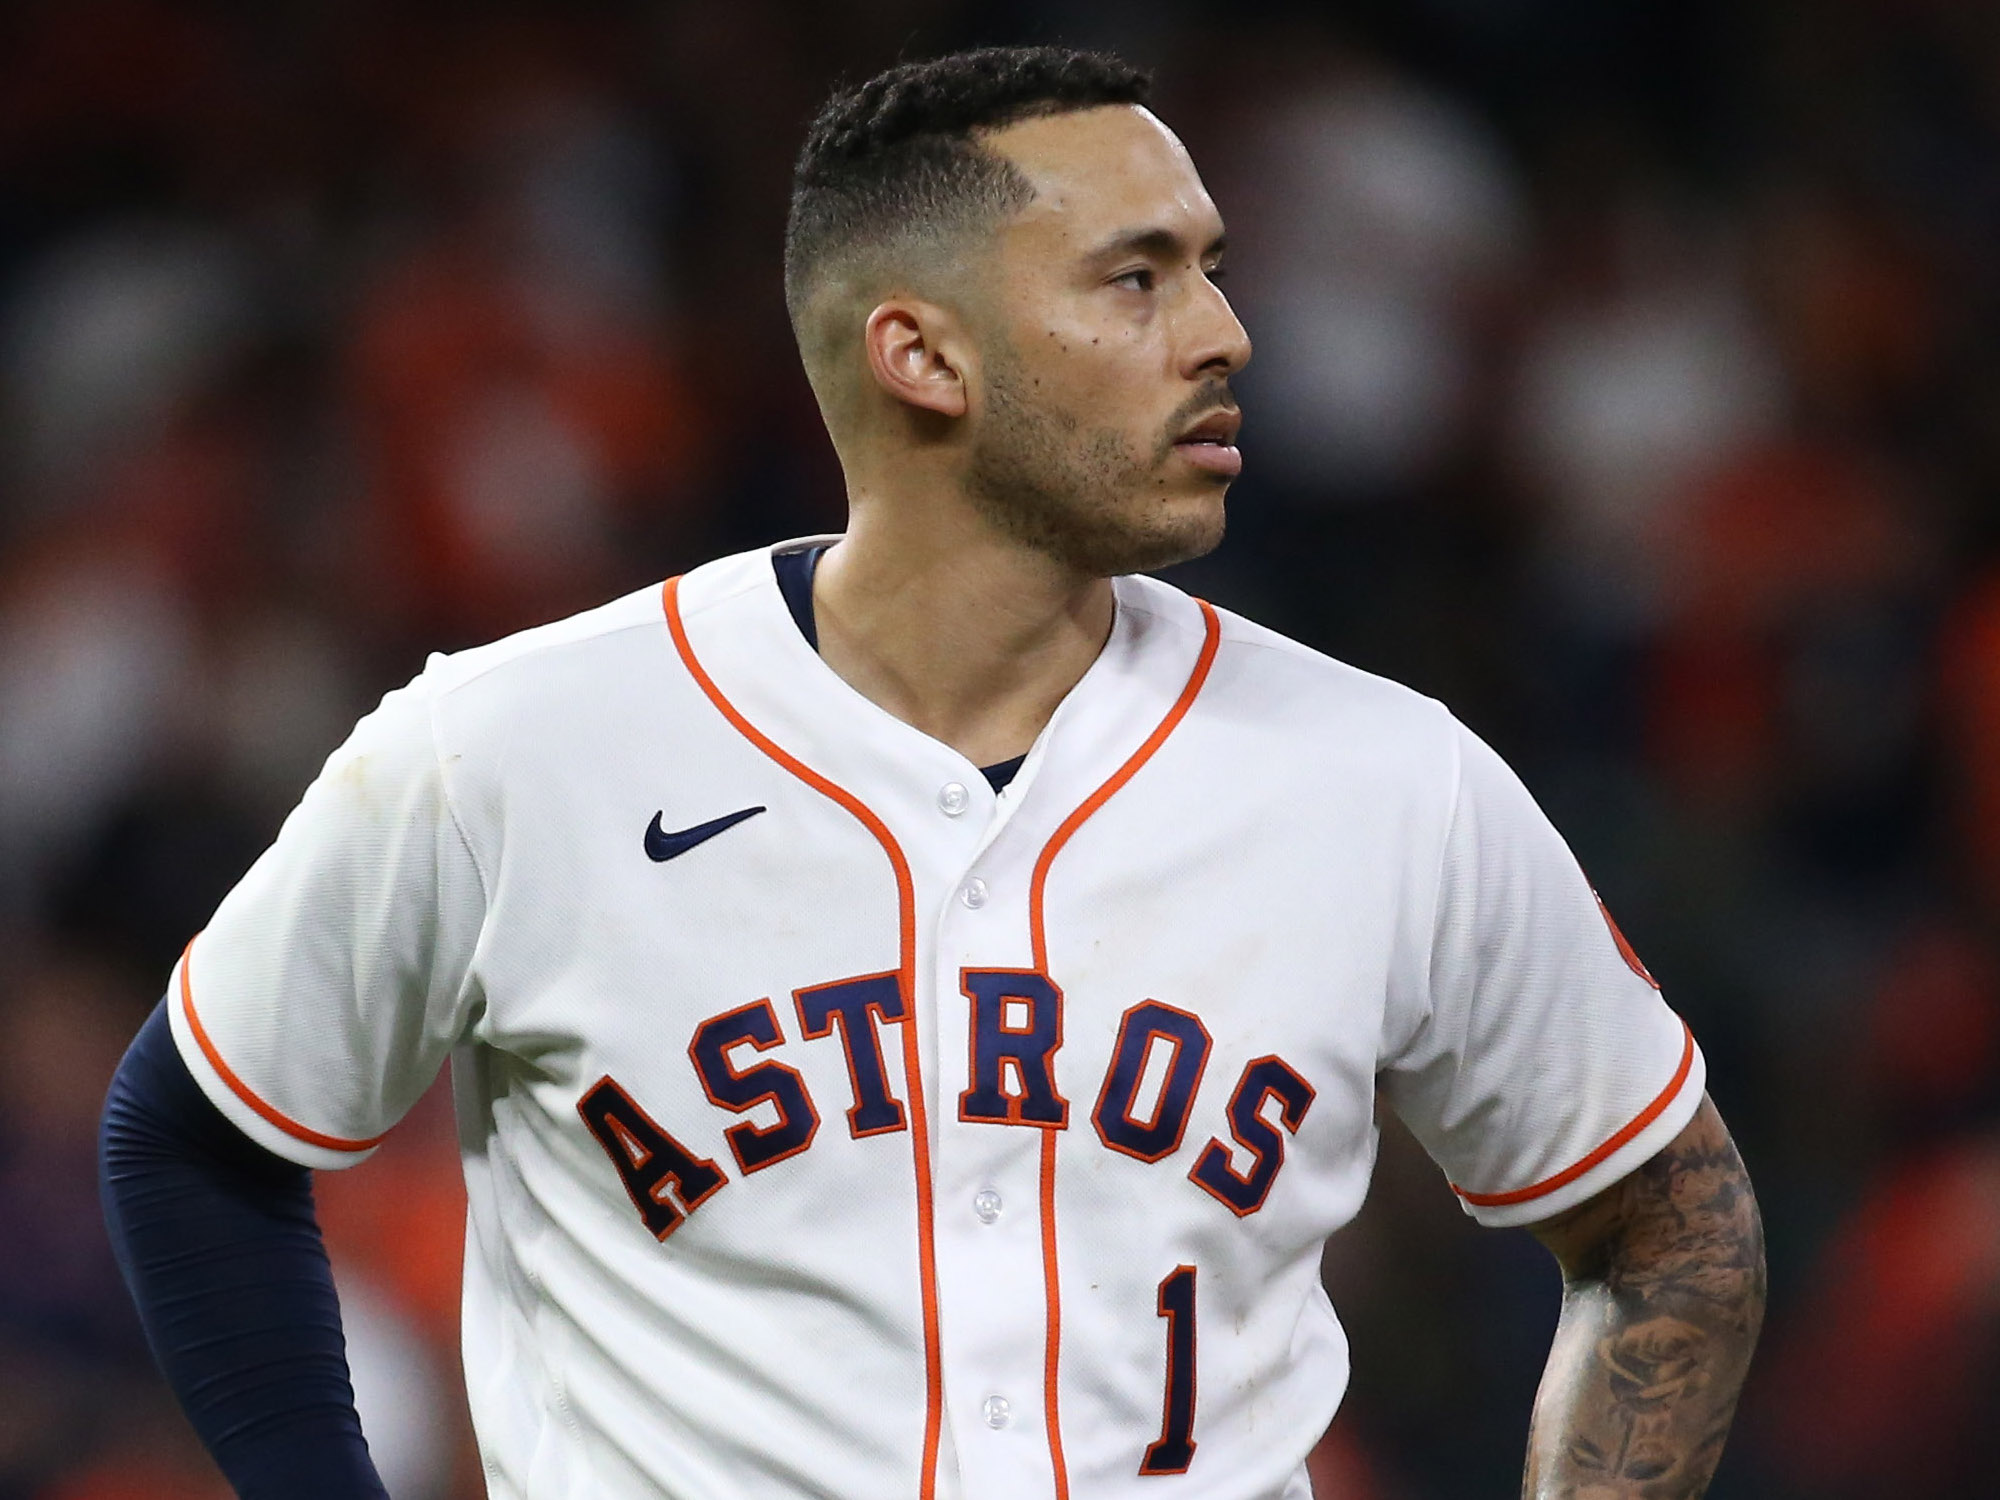 Houston Astros shortstop Carlos Correa (1) reacts after striking out against the Atlanta Braves during the sixth inning in game six of the 2021 World Series at Minute Maid Park.